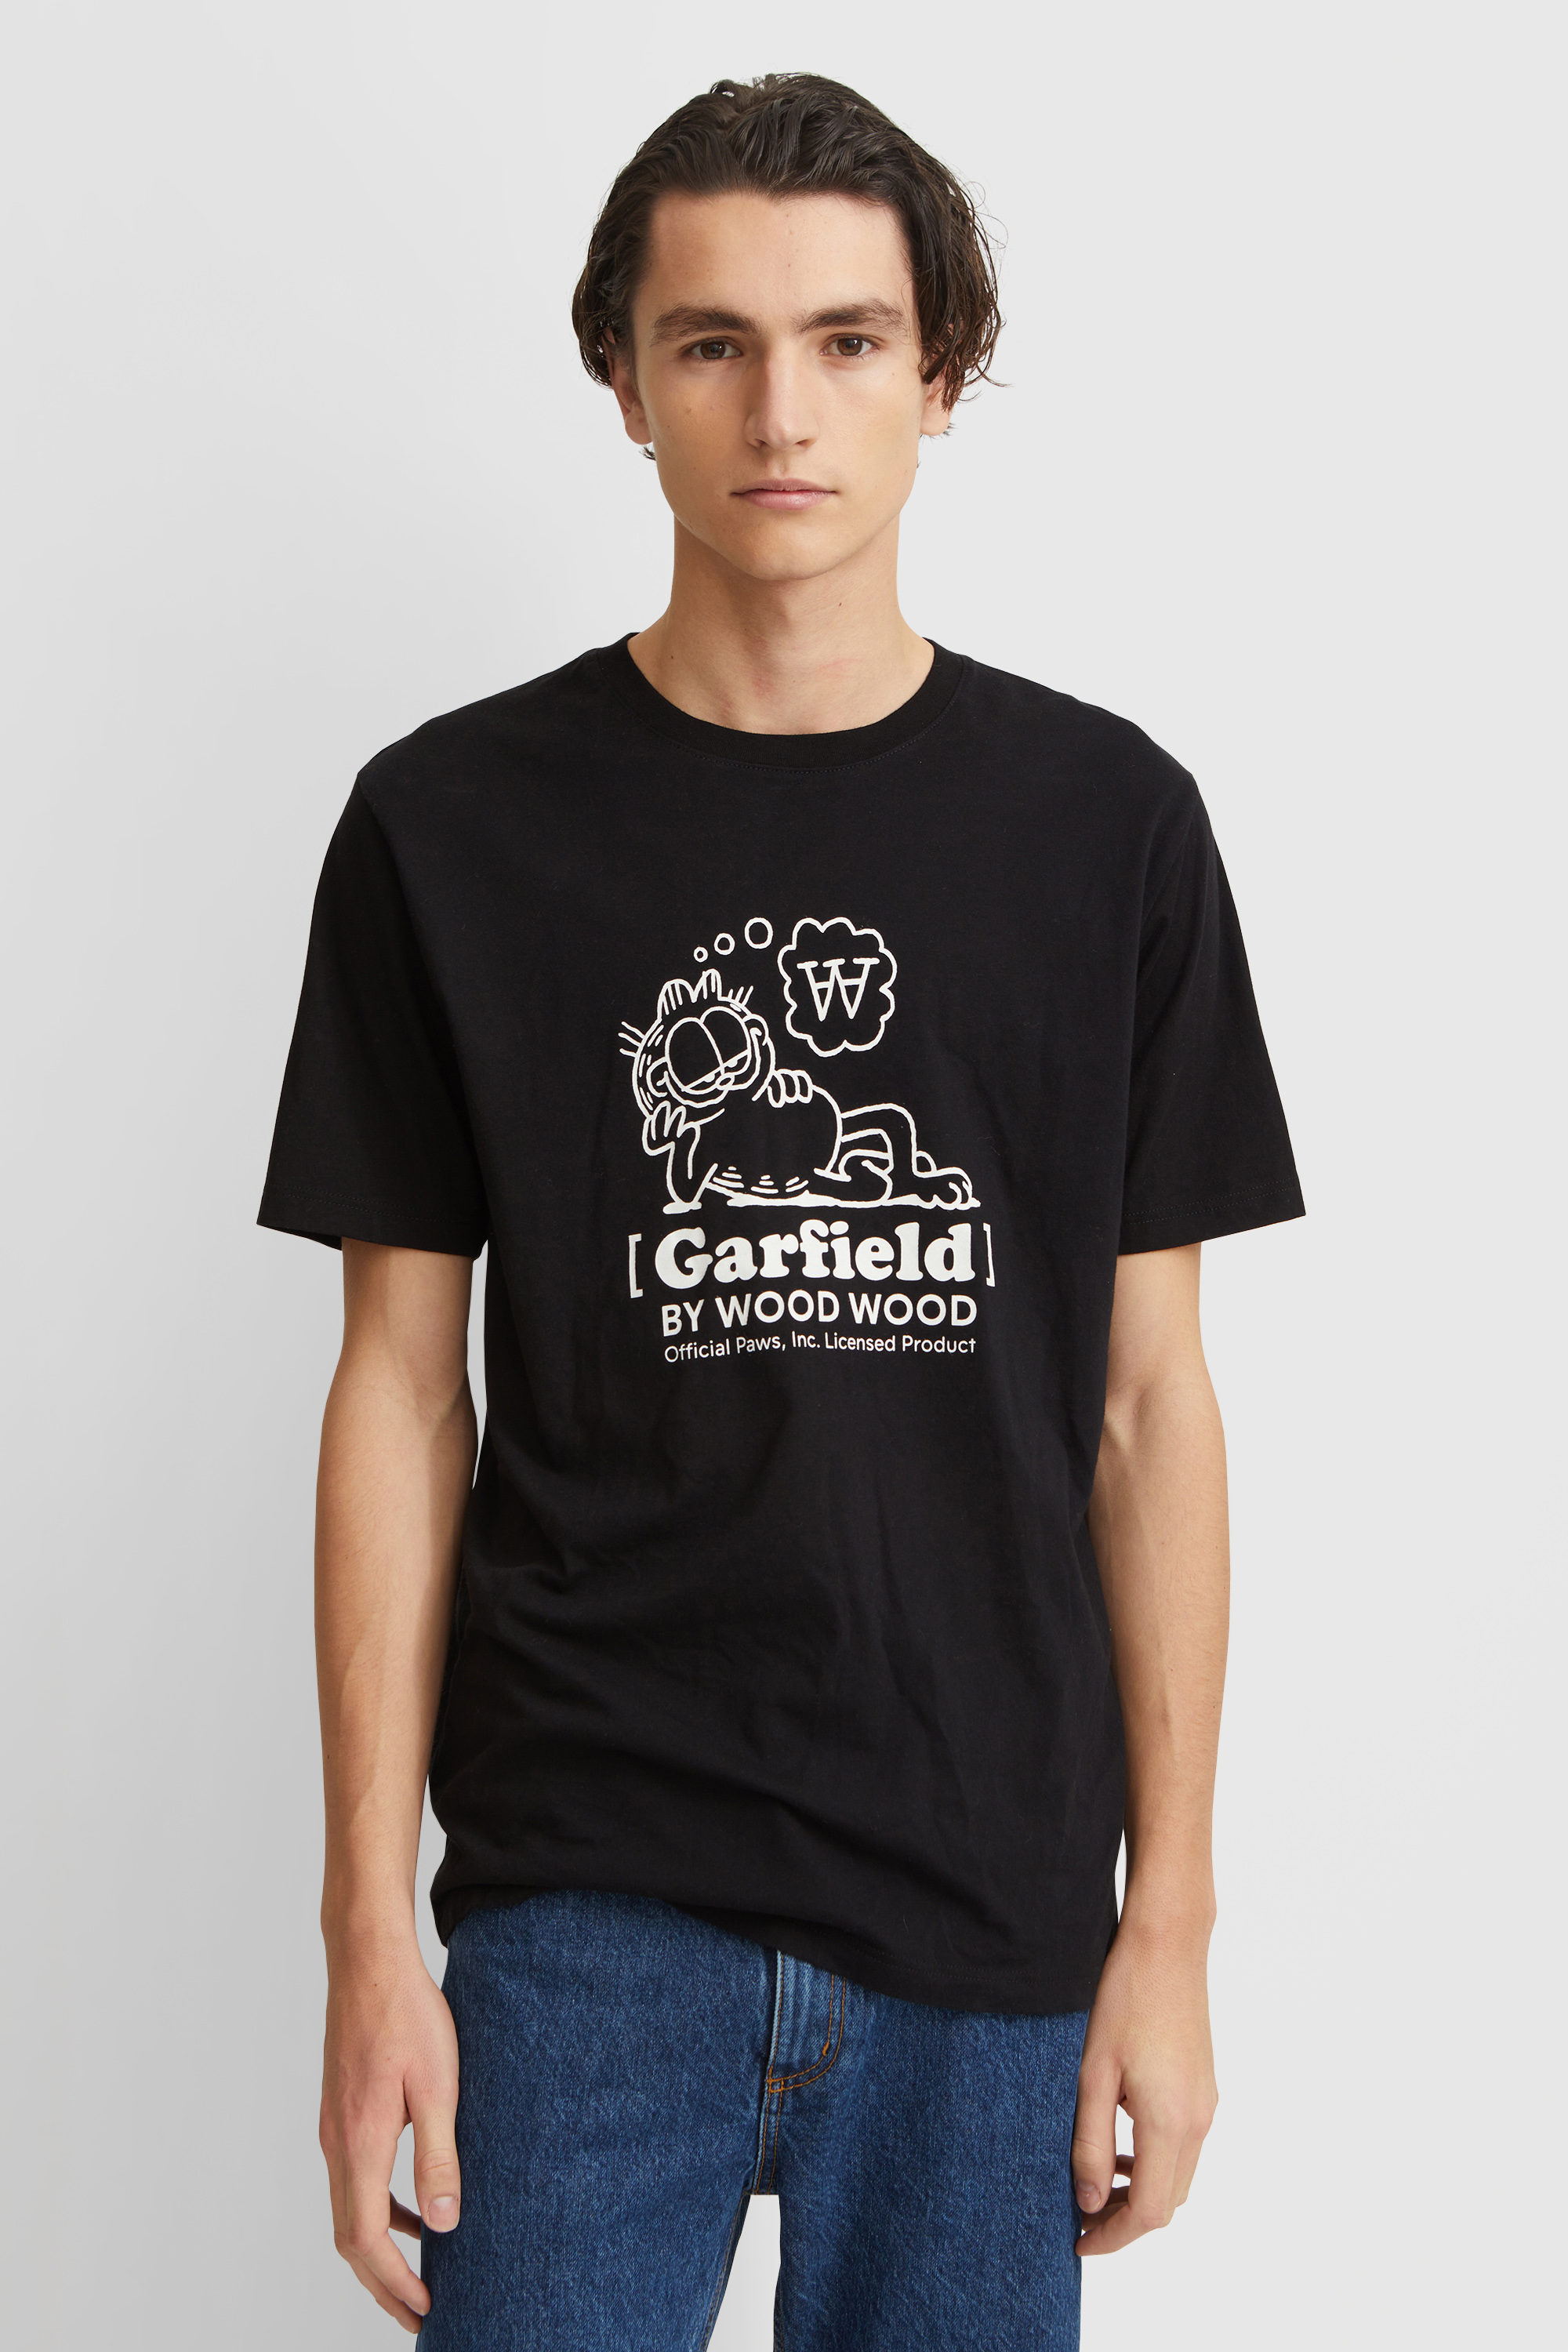 Garfield by Wood Chill Black | WoodWood.com